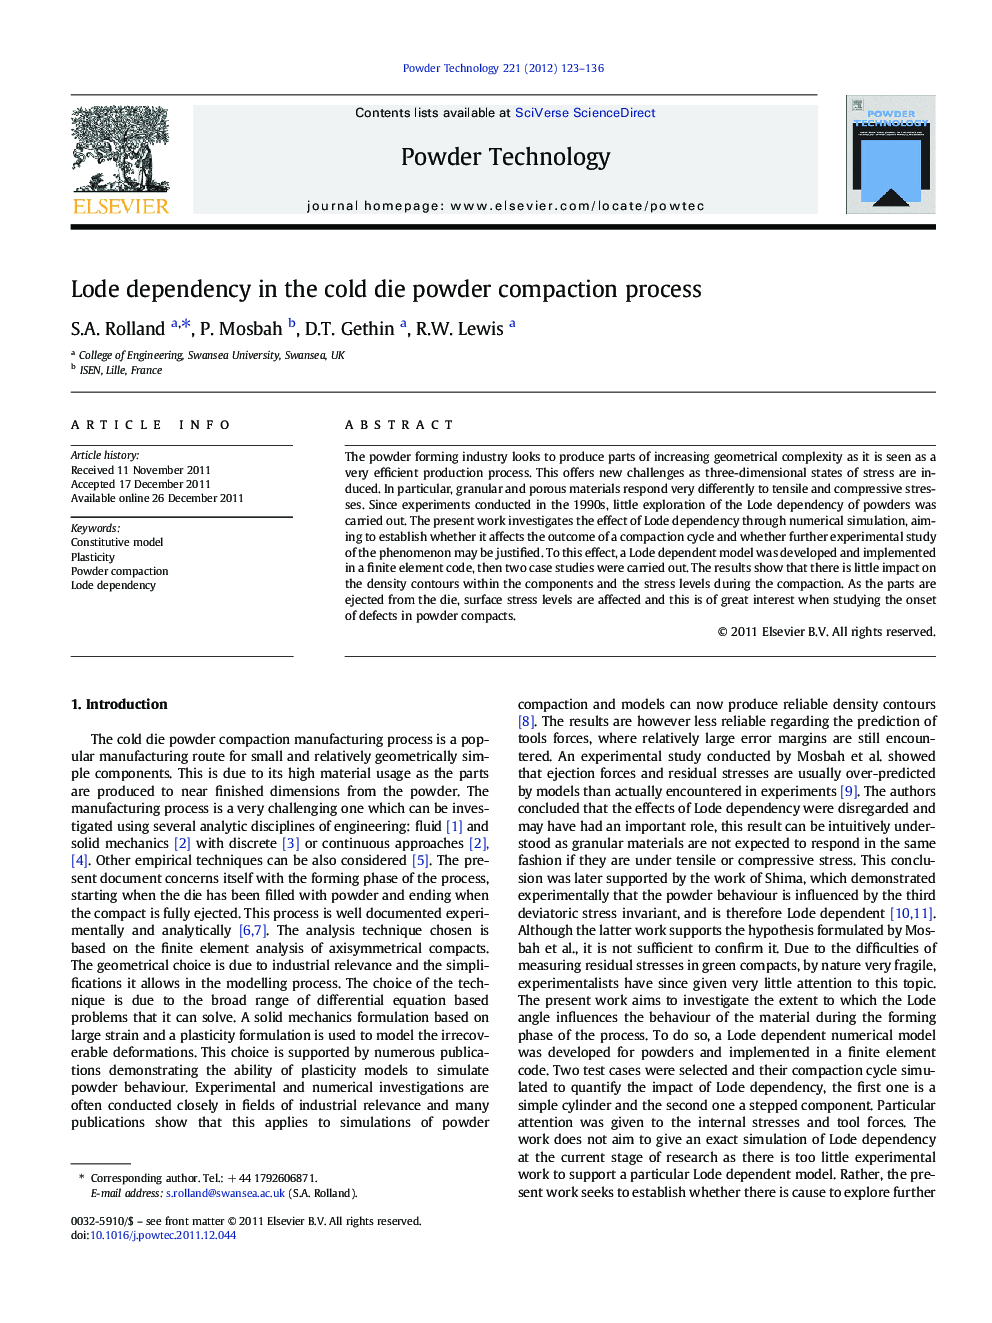 Lode dependency in the cold die powder compaction process